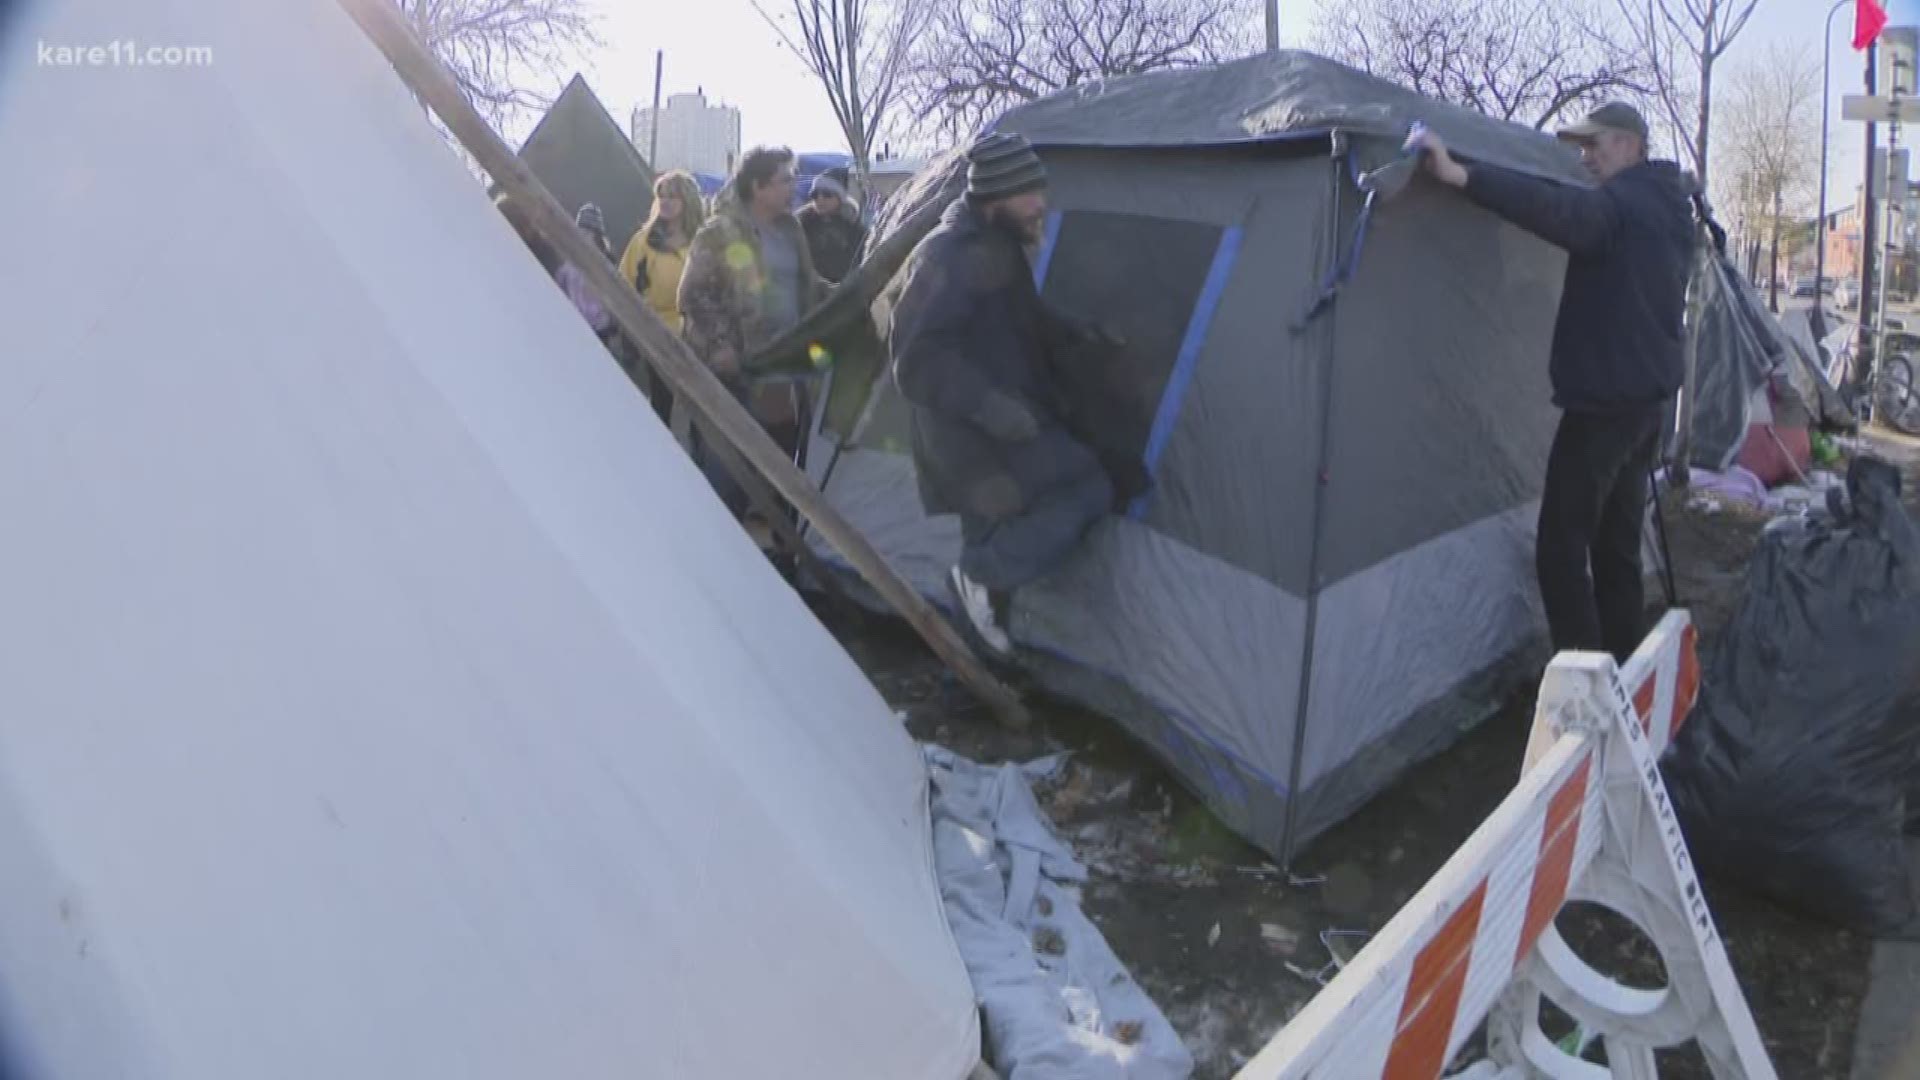 As people are cleared out of the St. Paul homeless encampment, Chris Hrapsky asked the question: Where will they go? And the answer, for some, was the Minneapolis camp. https://kare11.tv/2PYOnv7